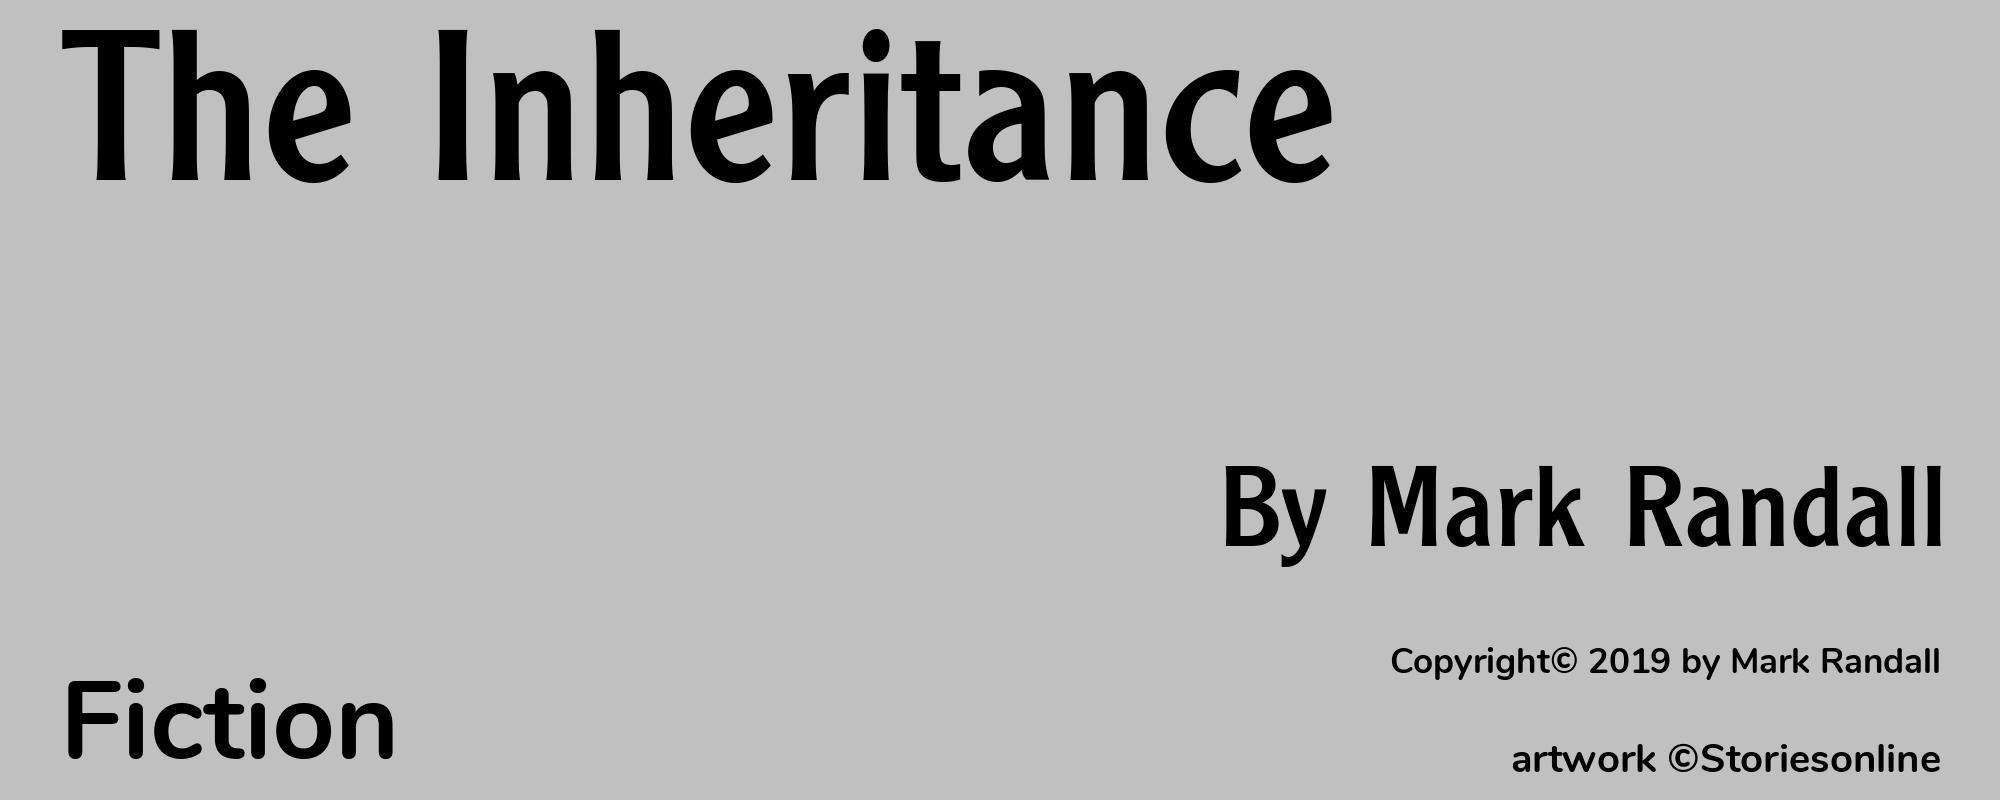 The Inheritance - Cover